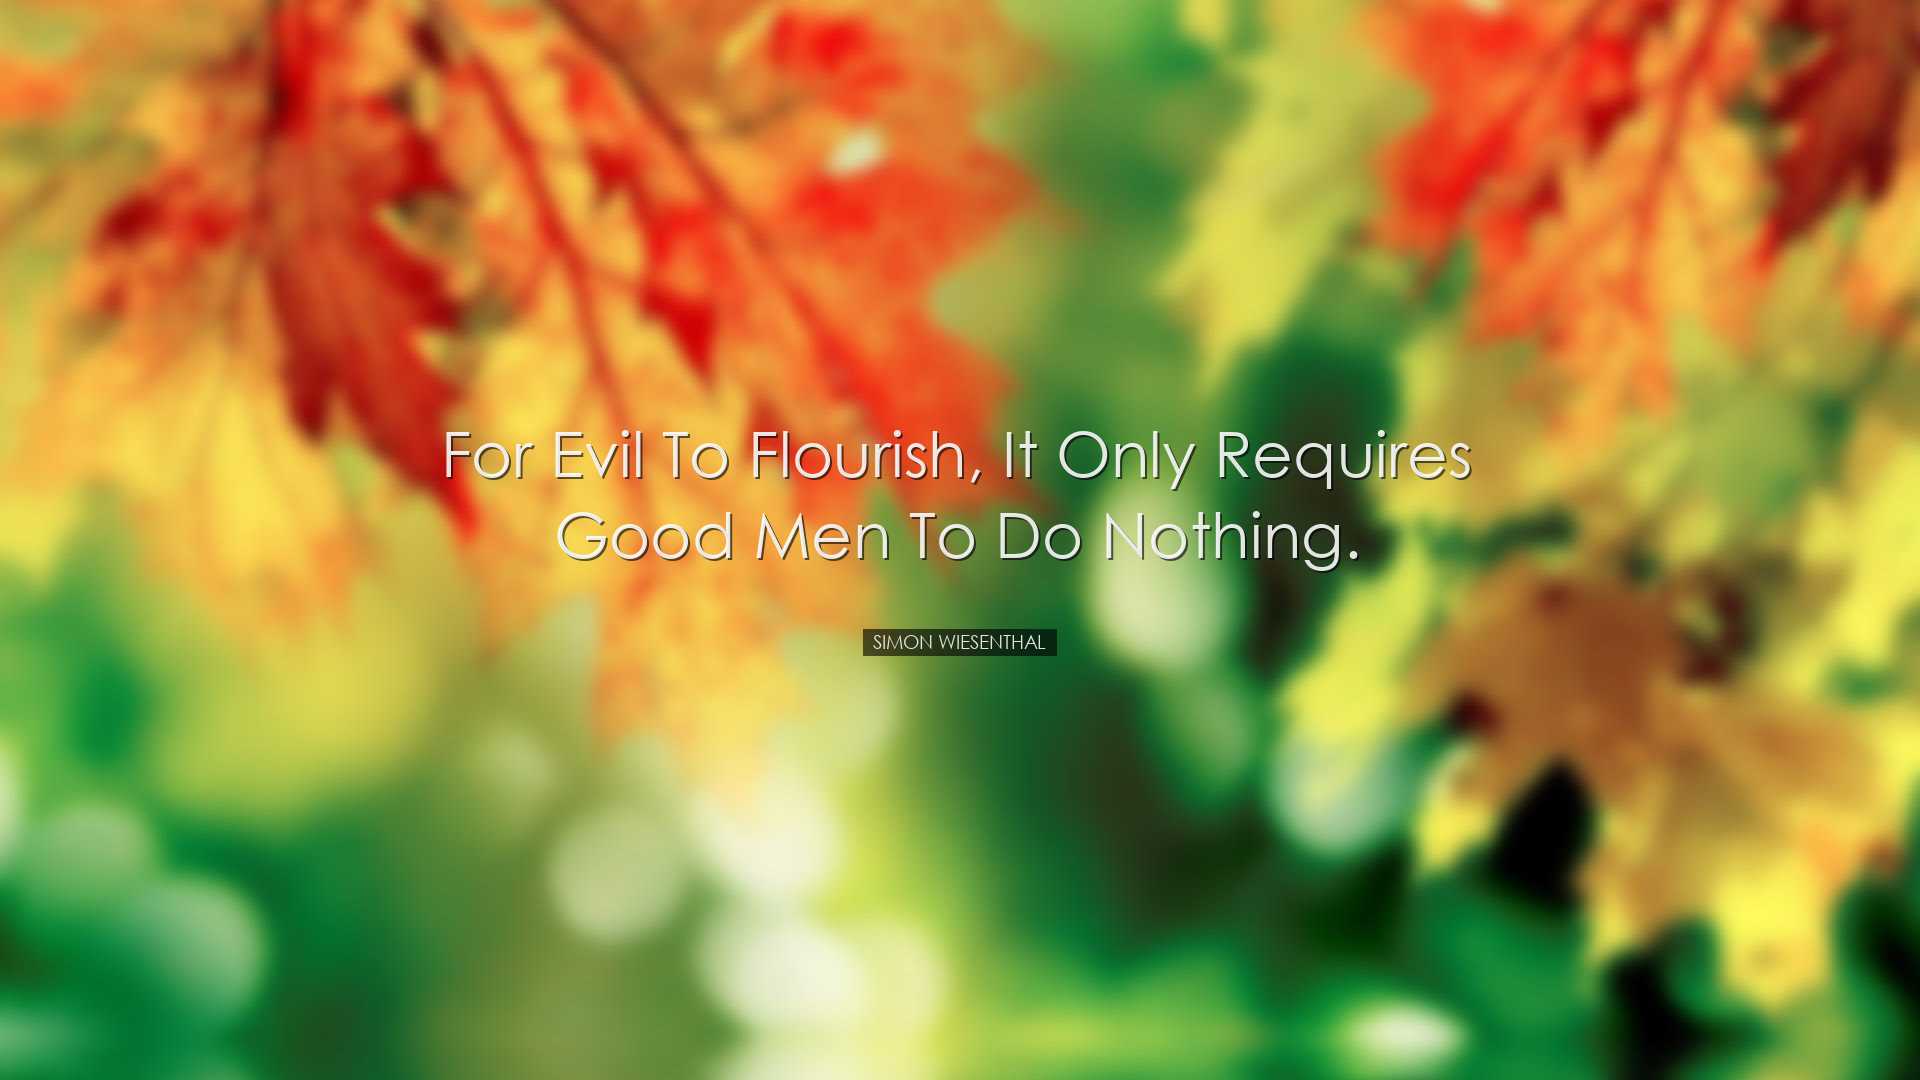 For evil to flourish, it only requires good men to do nothing. - S